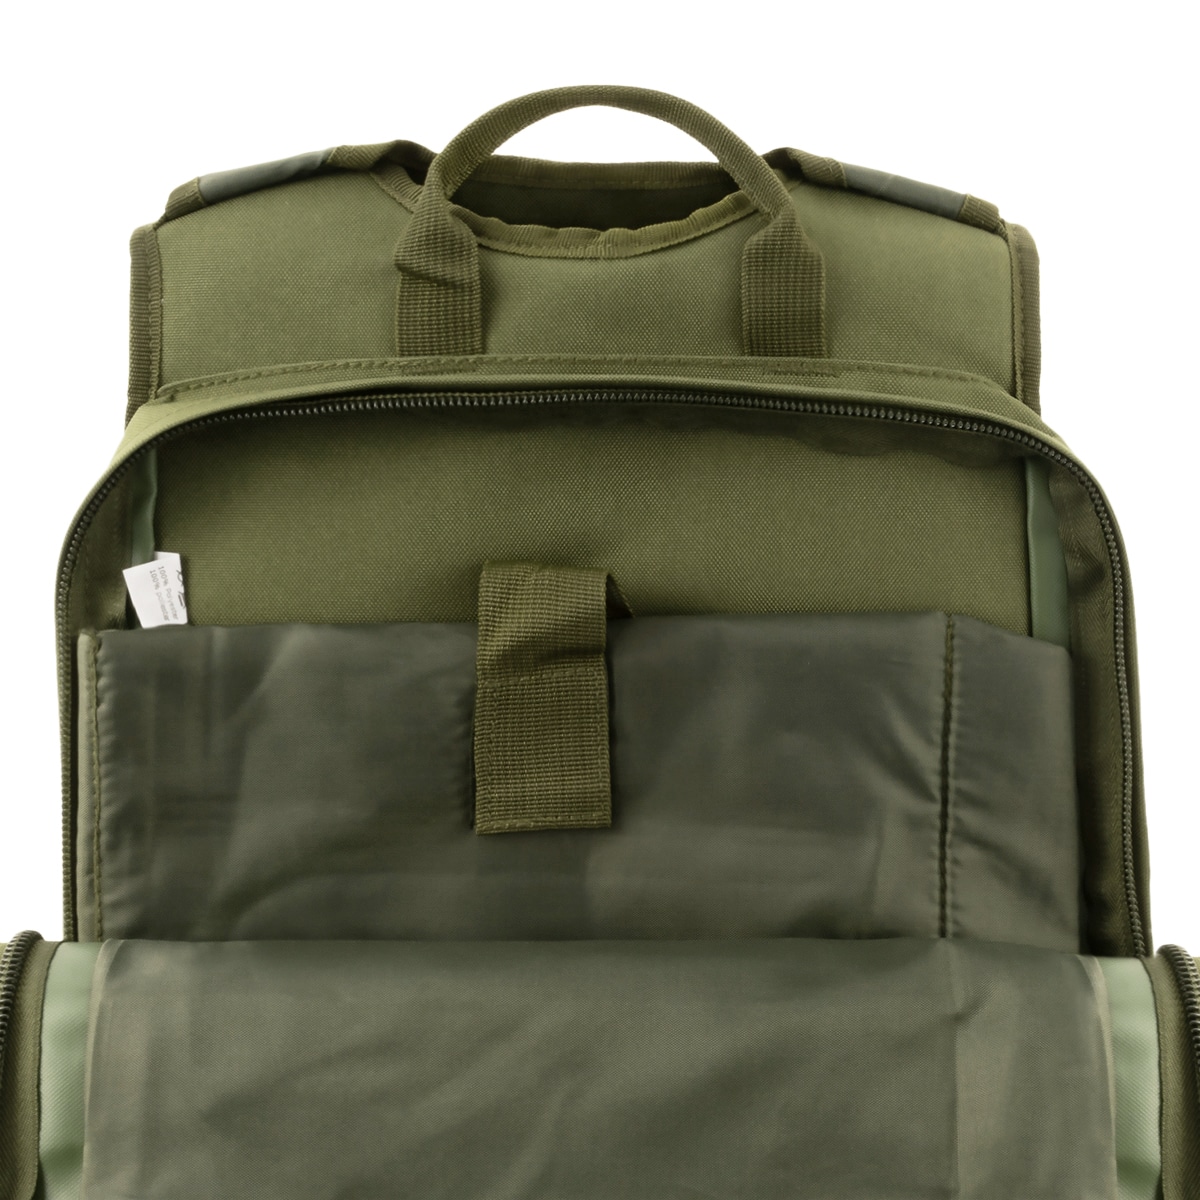 Рюкзак Badger Outdoor Sarge 30 л Olive